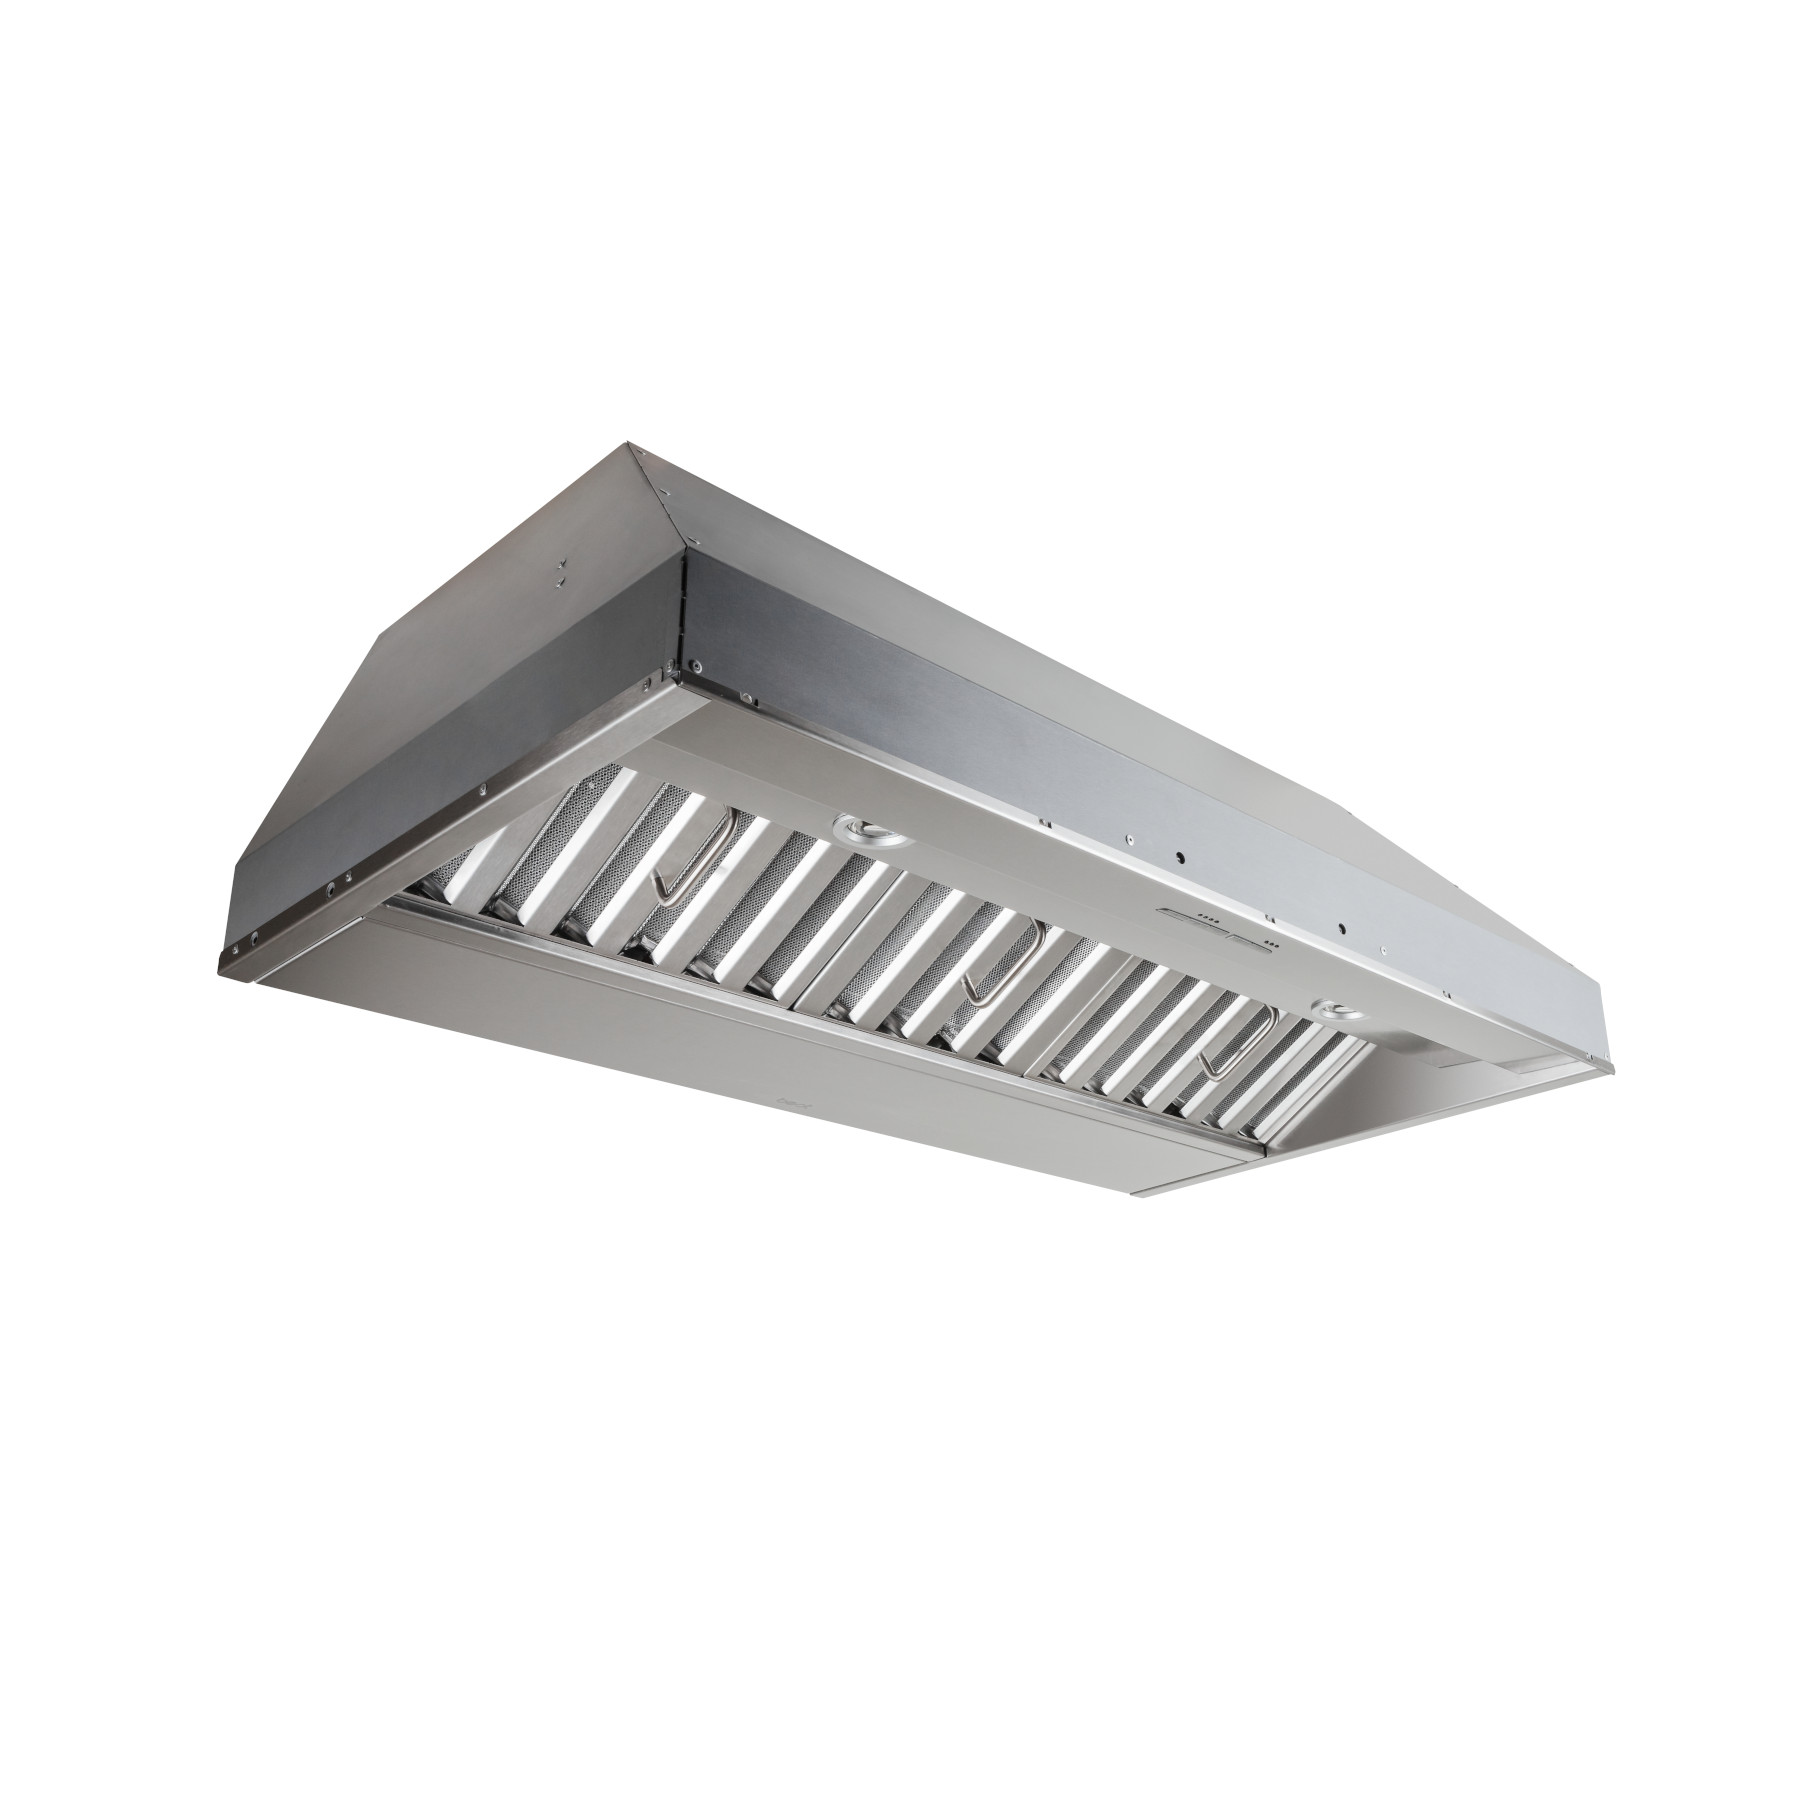 a range hood required by code